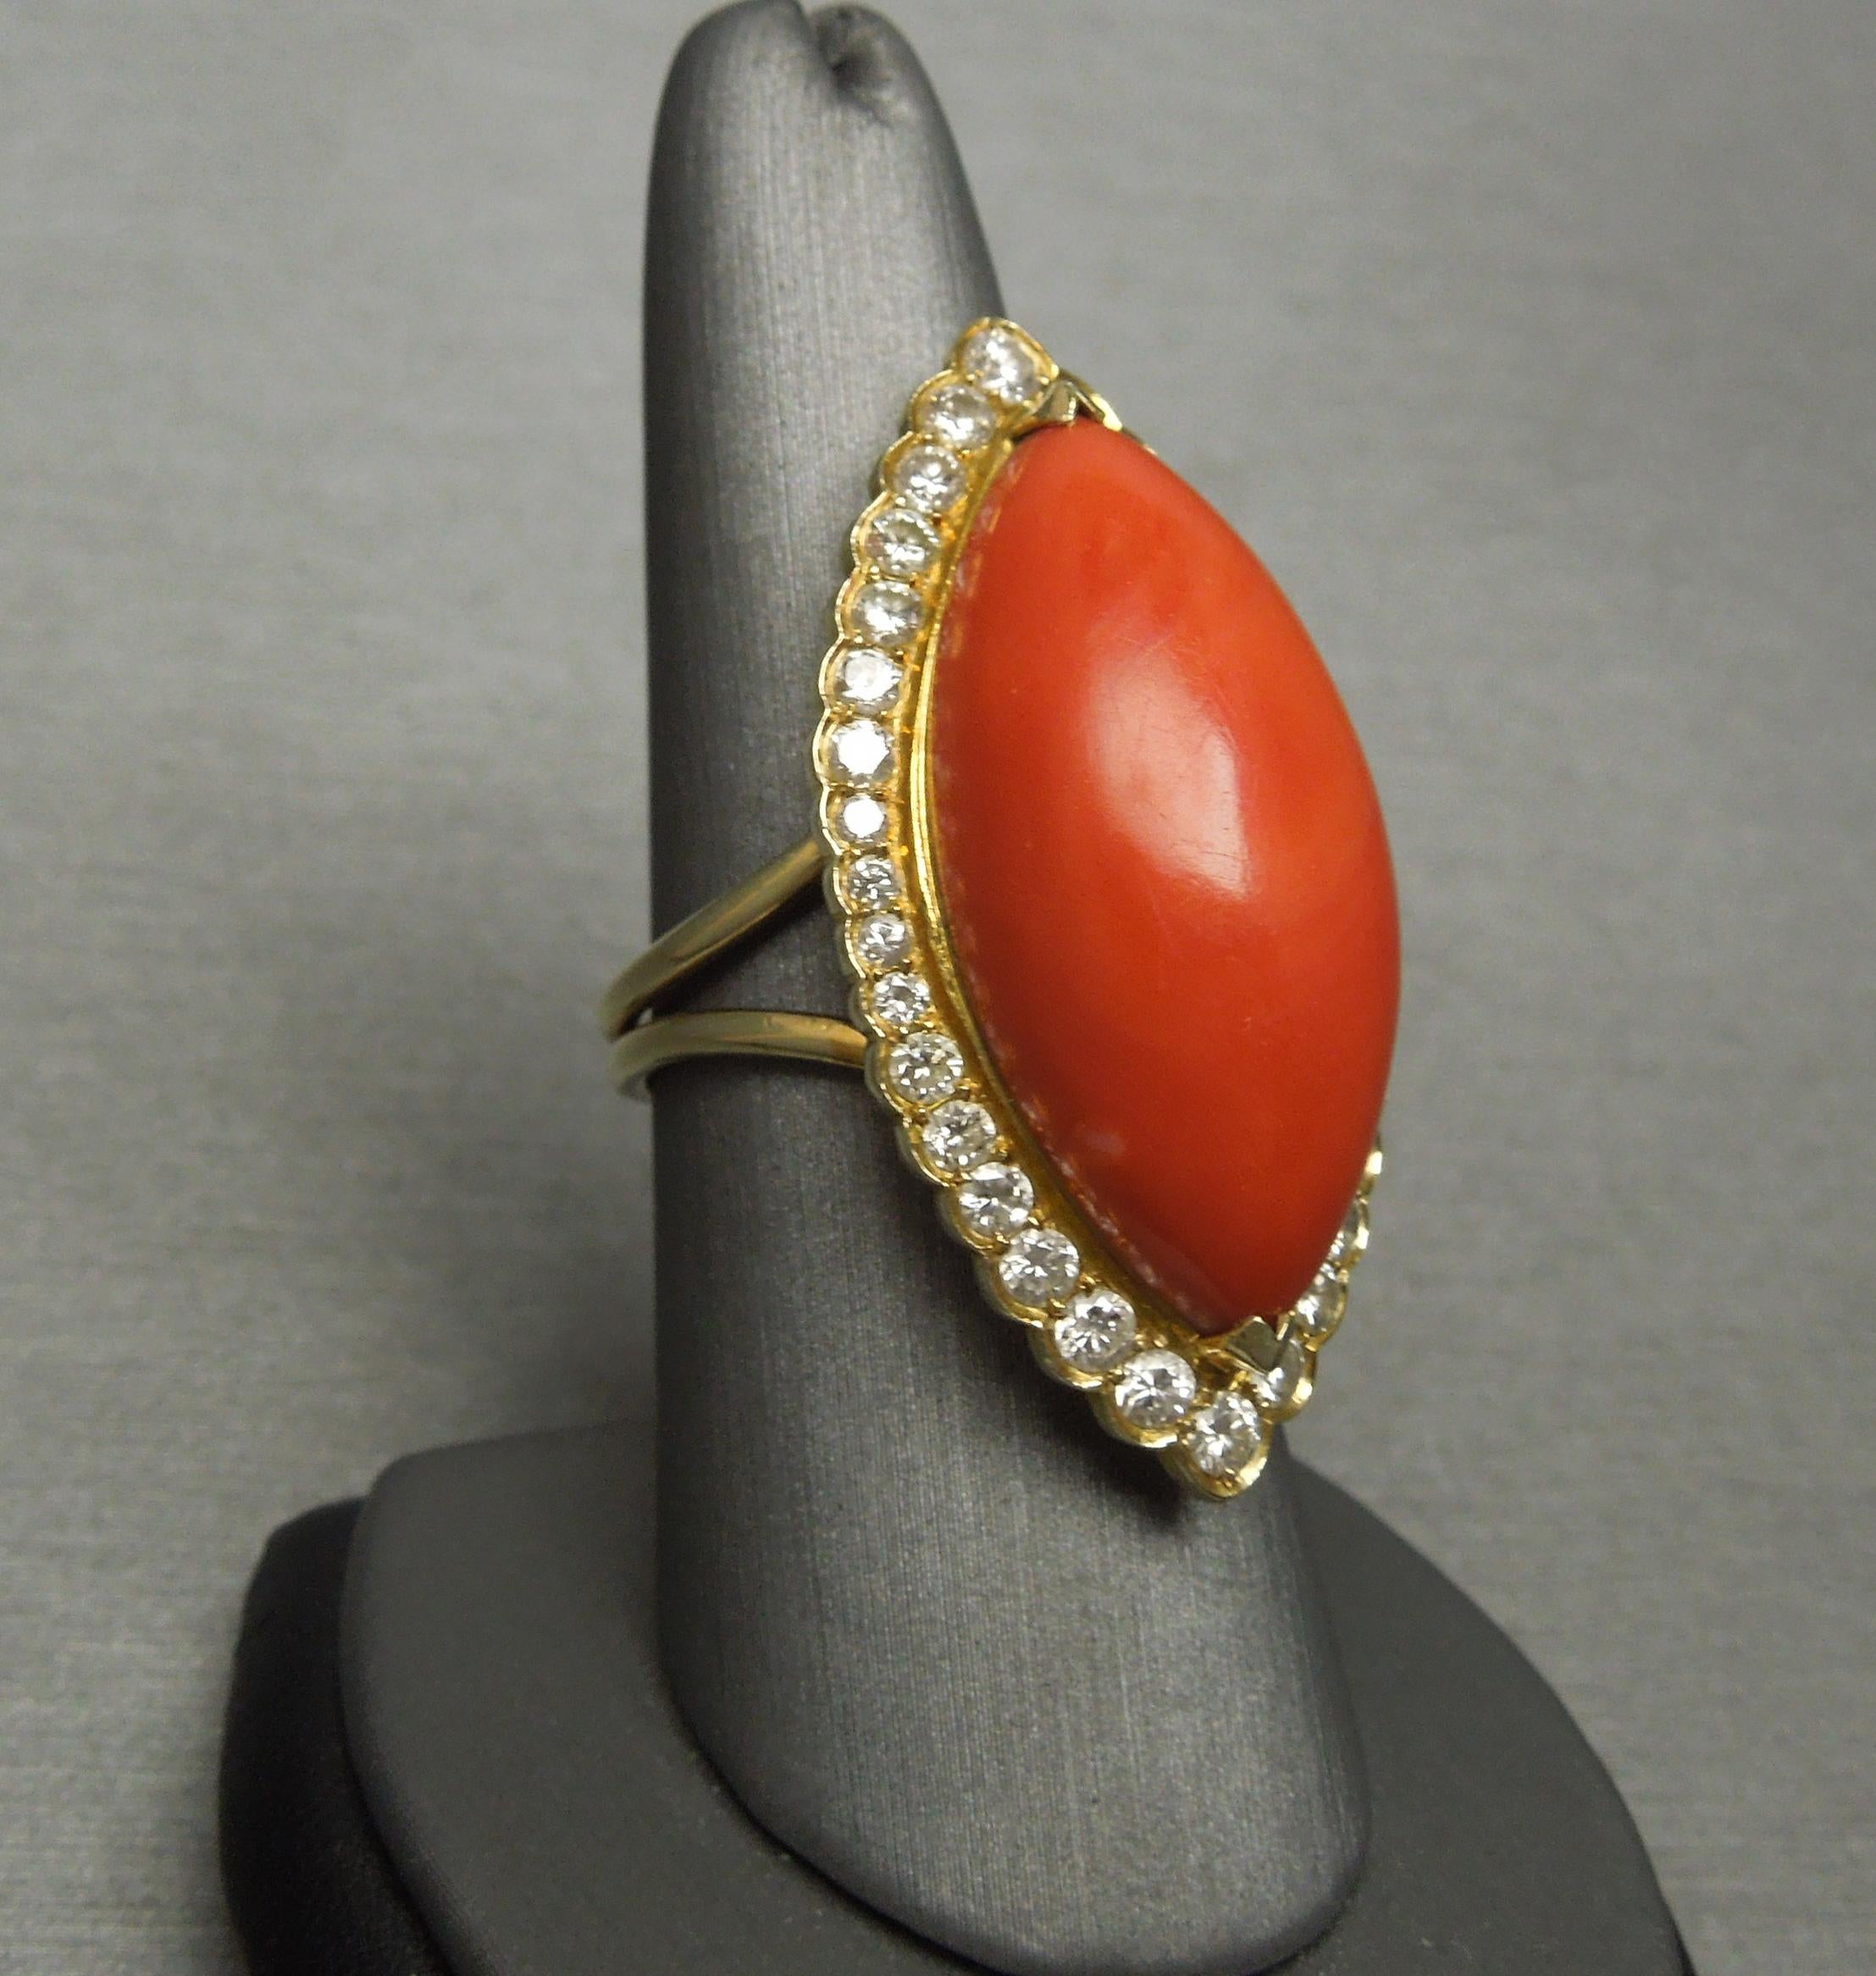 Featuring 1 Focal Marquise-shaped piece of Natural Red Coral
measuring approximately 31.8mm in length x 13.9mm at widest

Bordered by a total of approximately 2 carats of
Colorless Nearly Flawless Round Brilliant cut Diamonds
ranking an E-F Color &